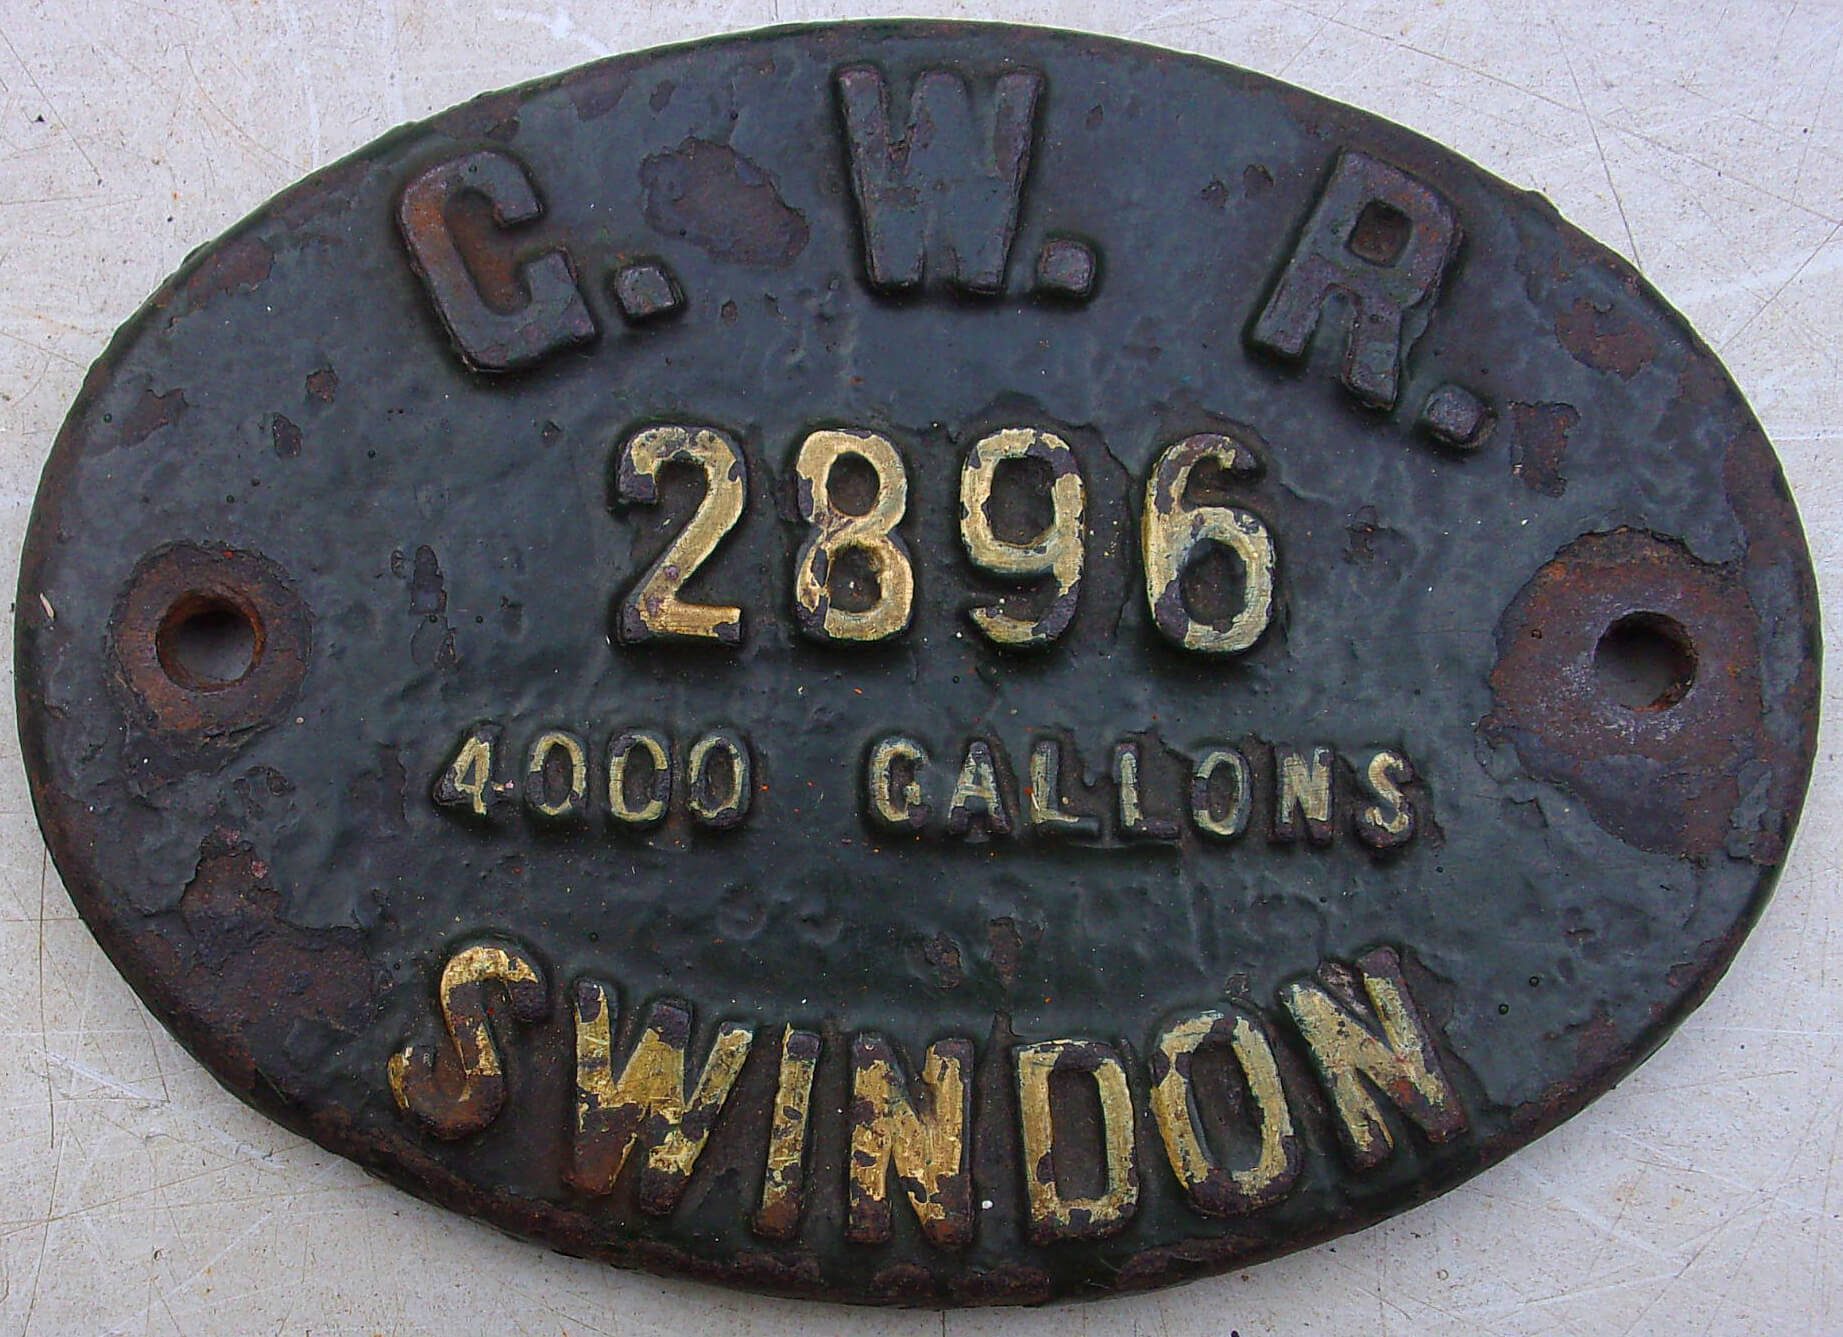 GWR Tenderplate “GWR 2896 4000 Gallons Swindon”. - Great Northern ...